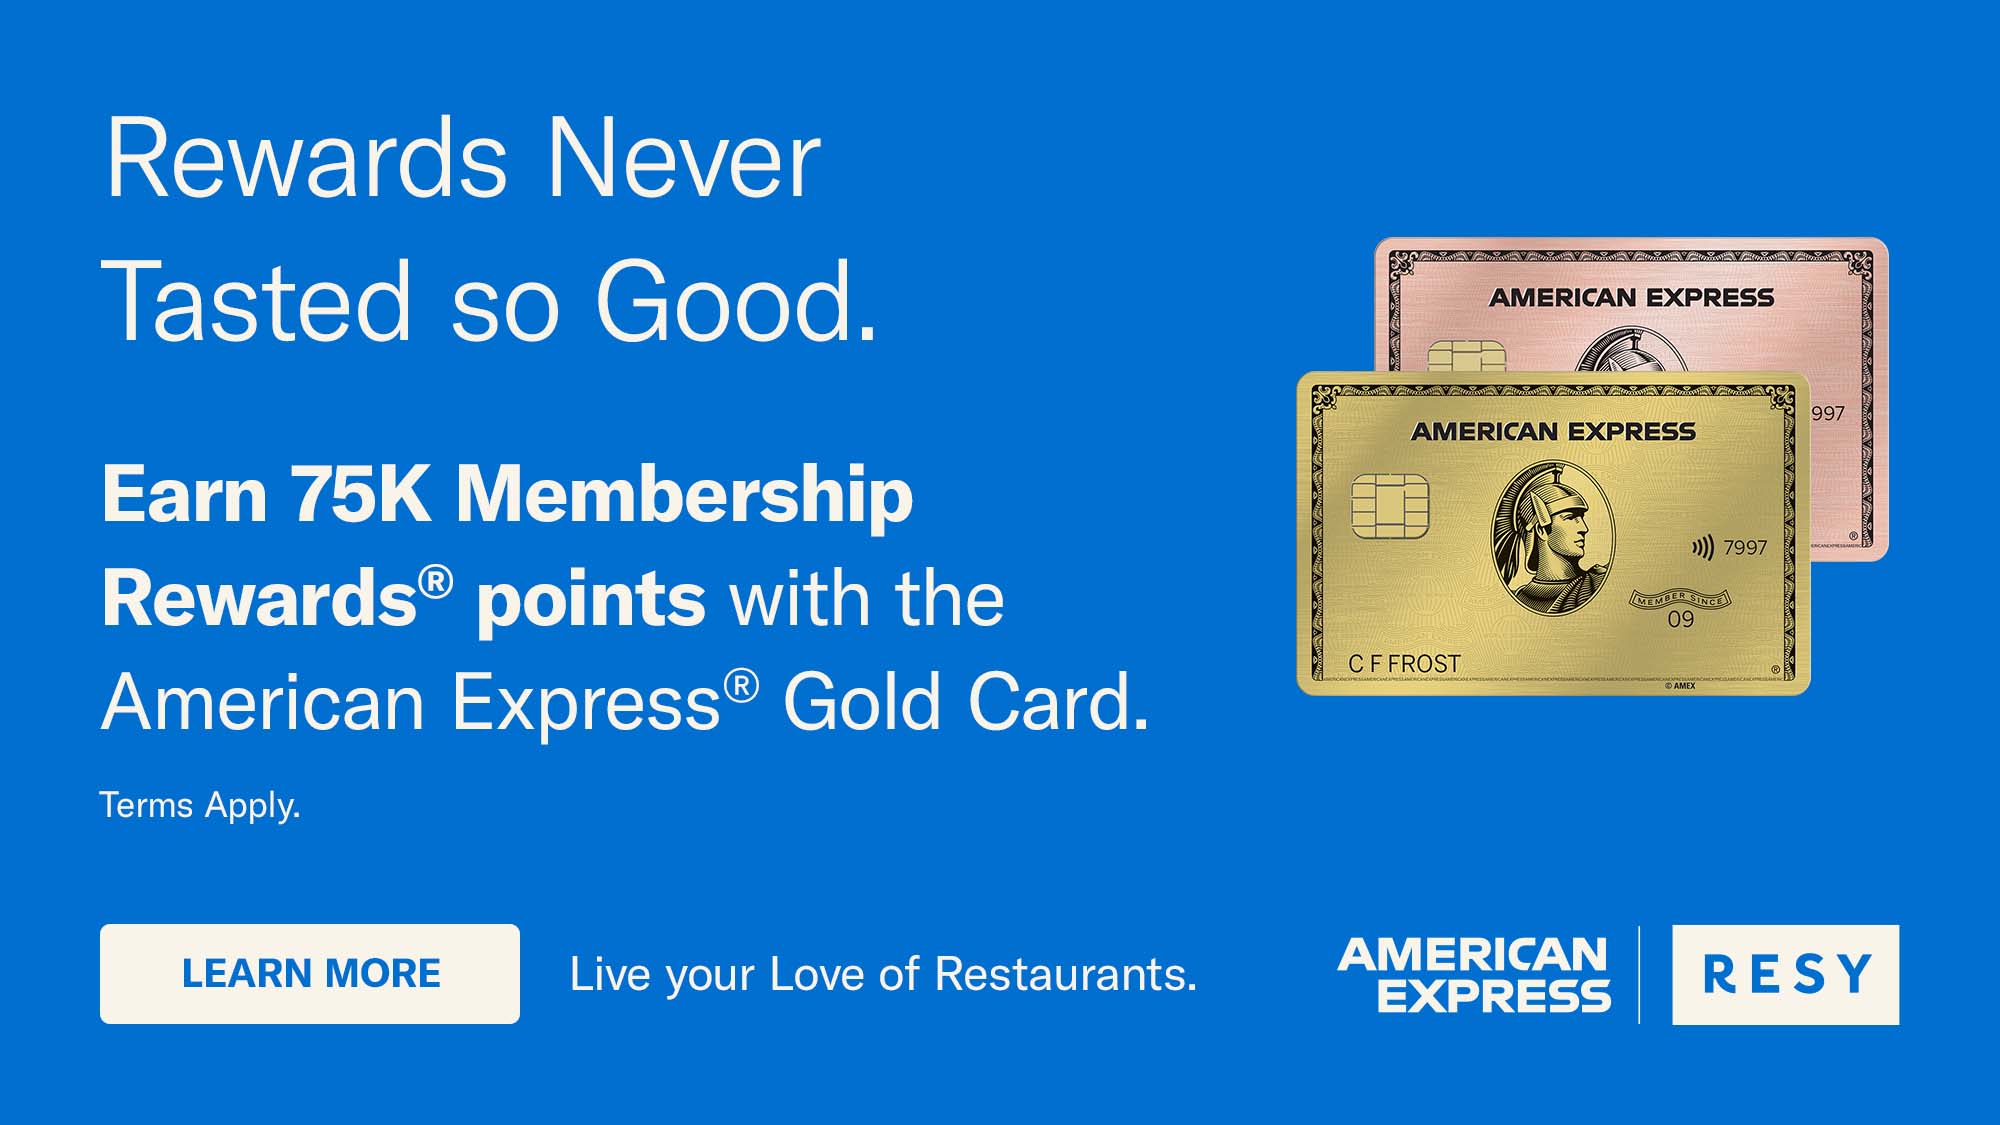 Earn 75k Membership Rewards® points with the American Express® Gold Card.